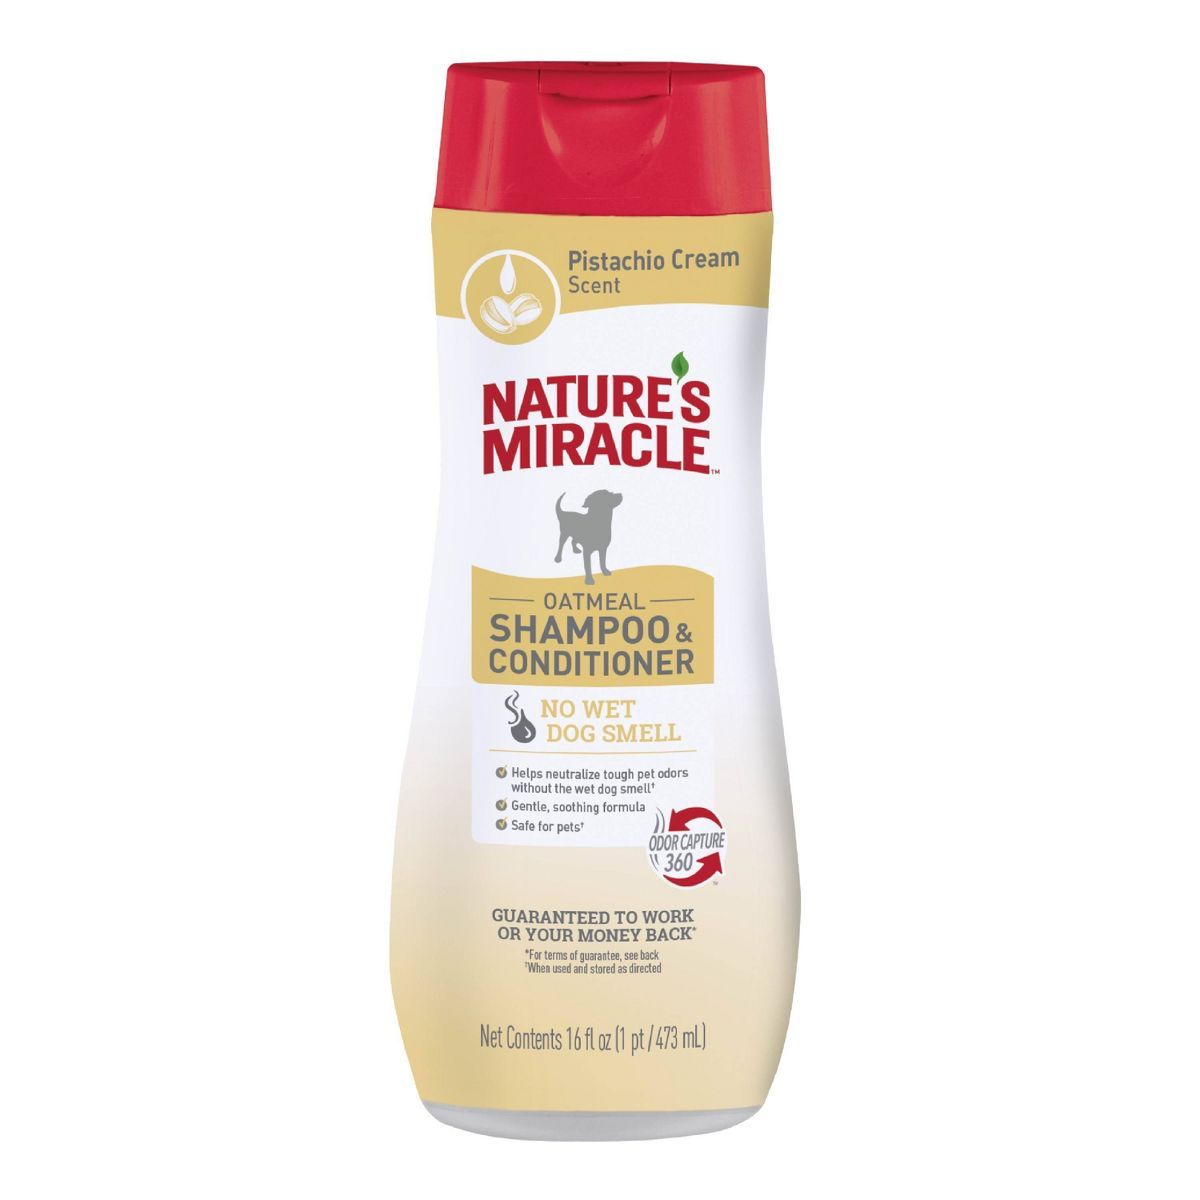 Nature's Miracle Oatmeal Shampoo & Conditioner for Dogs - 16 fl oz | Target